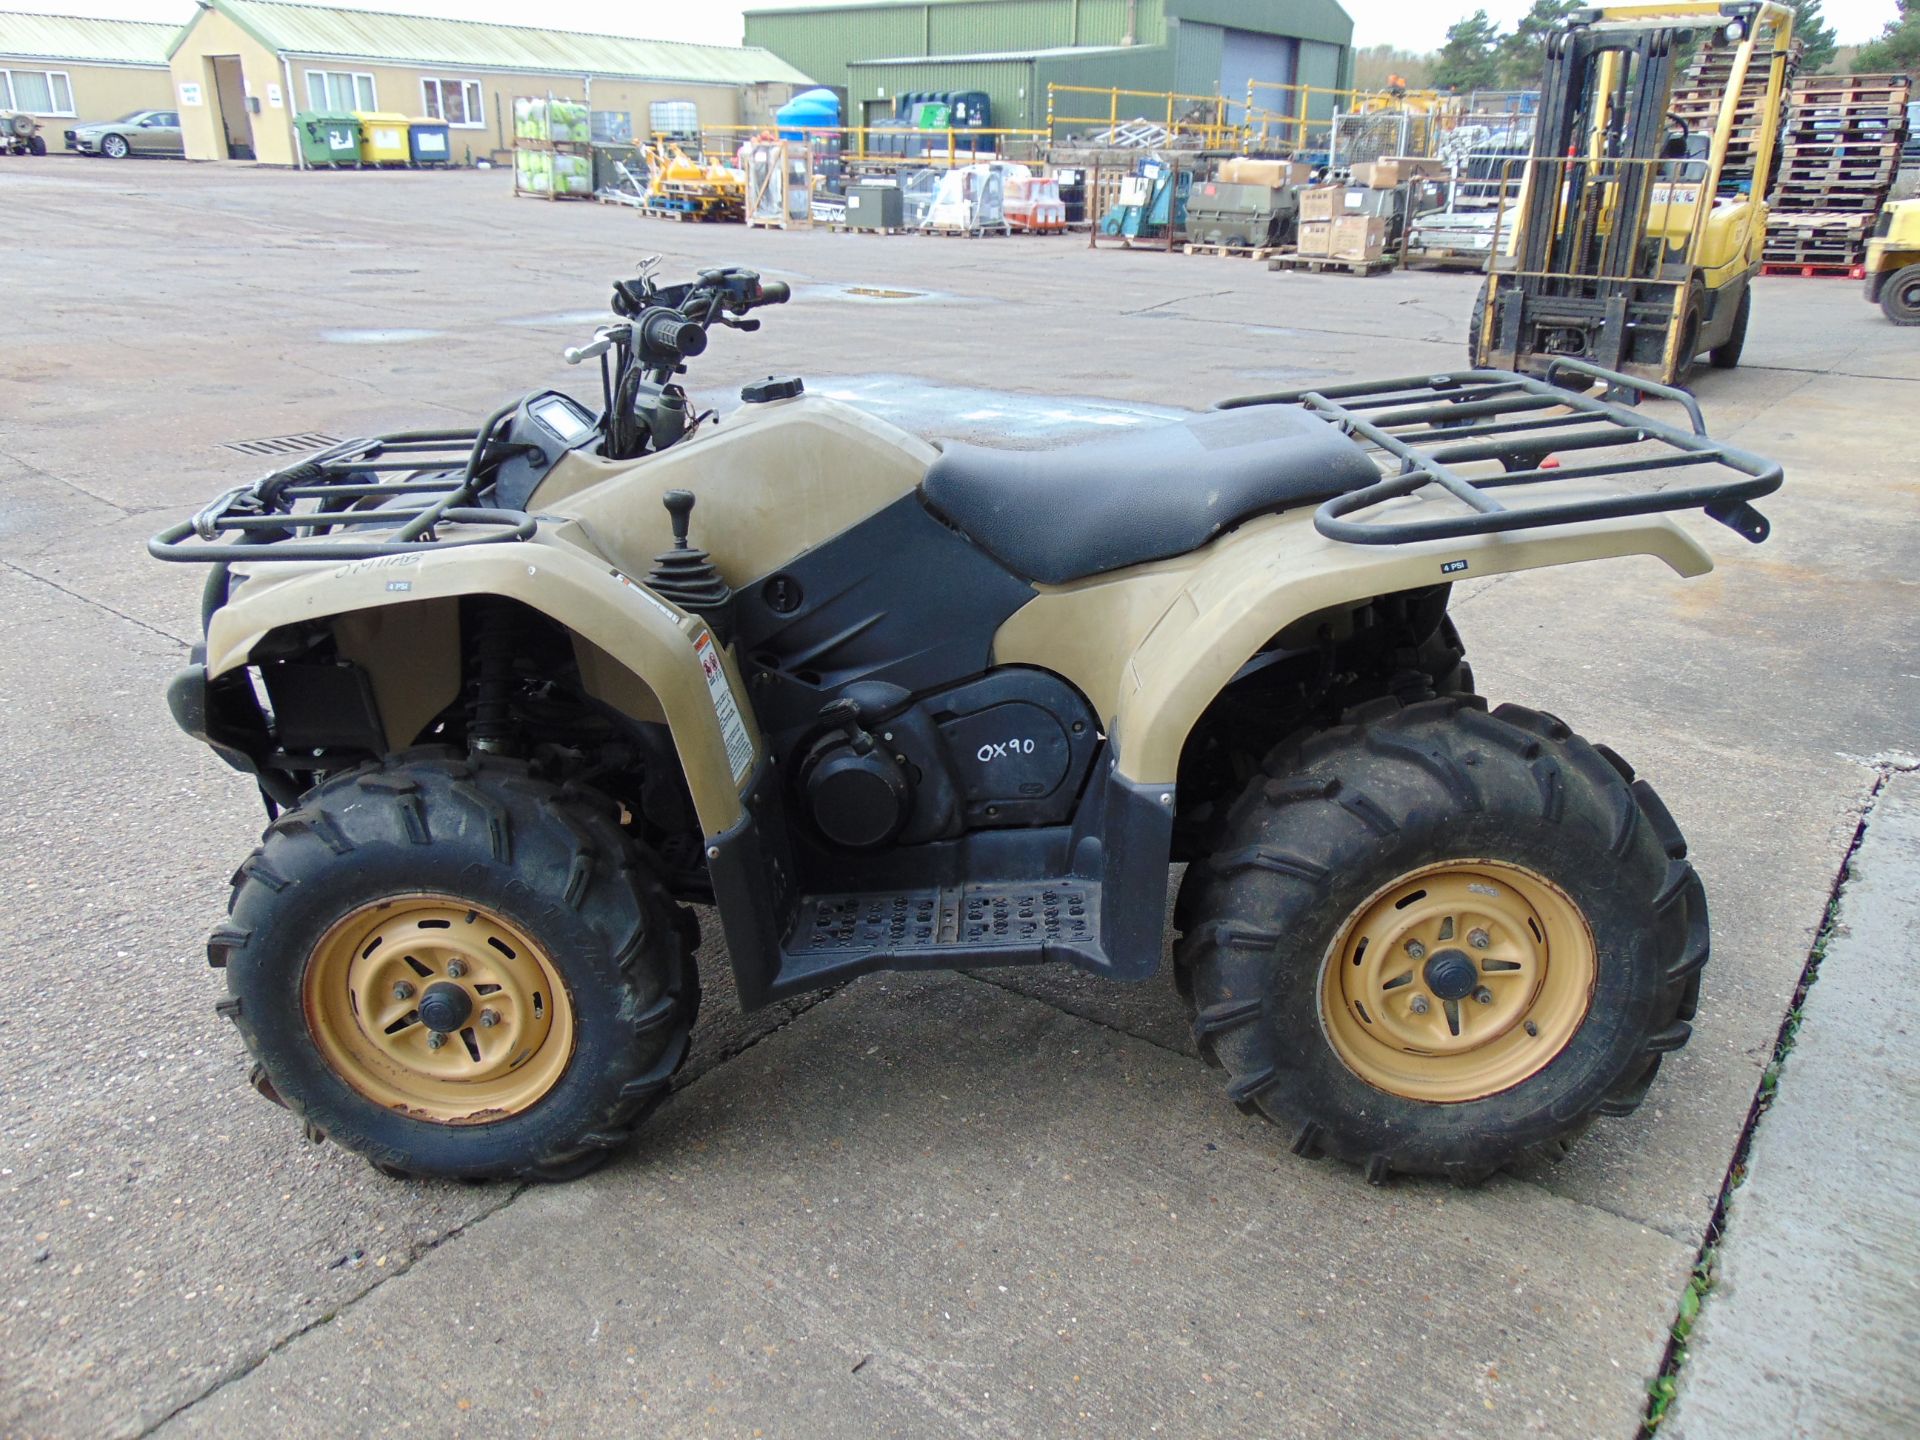 Military Specification Yamaha Grizzly 450 4 x 4 ATV Quad Bike Complete with Winch 591 Hours Only! - Image 4 of 16